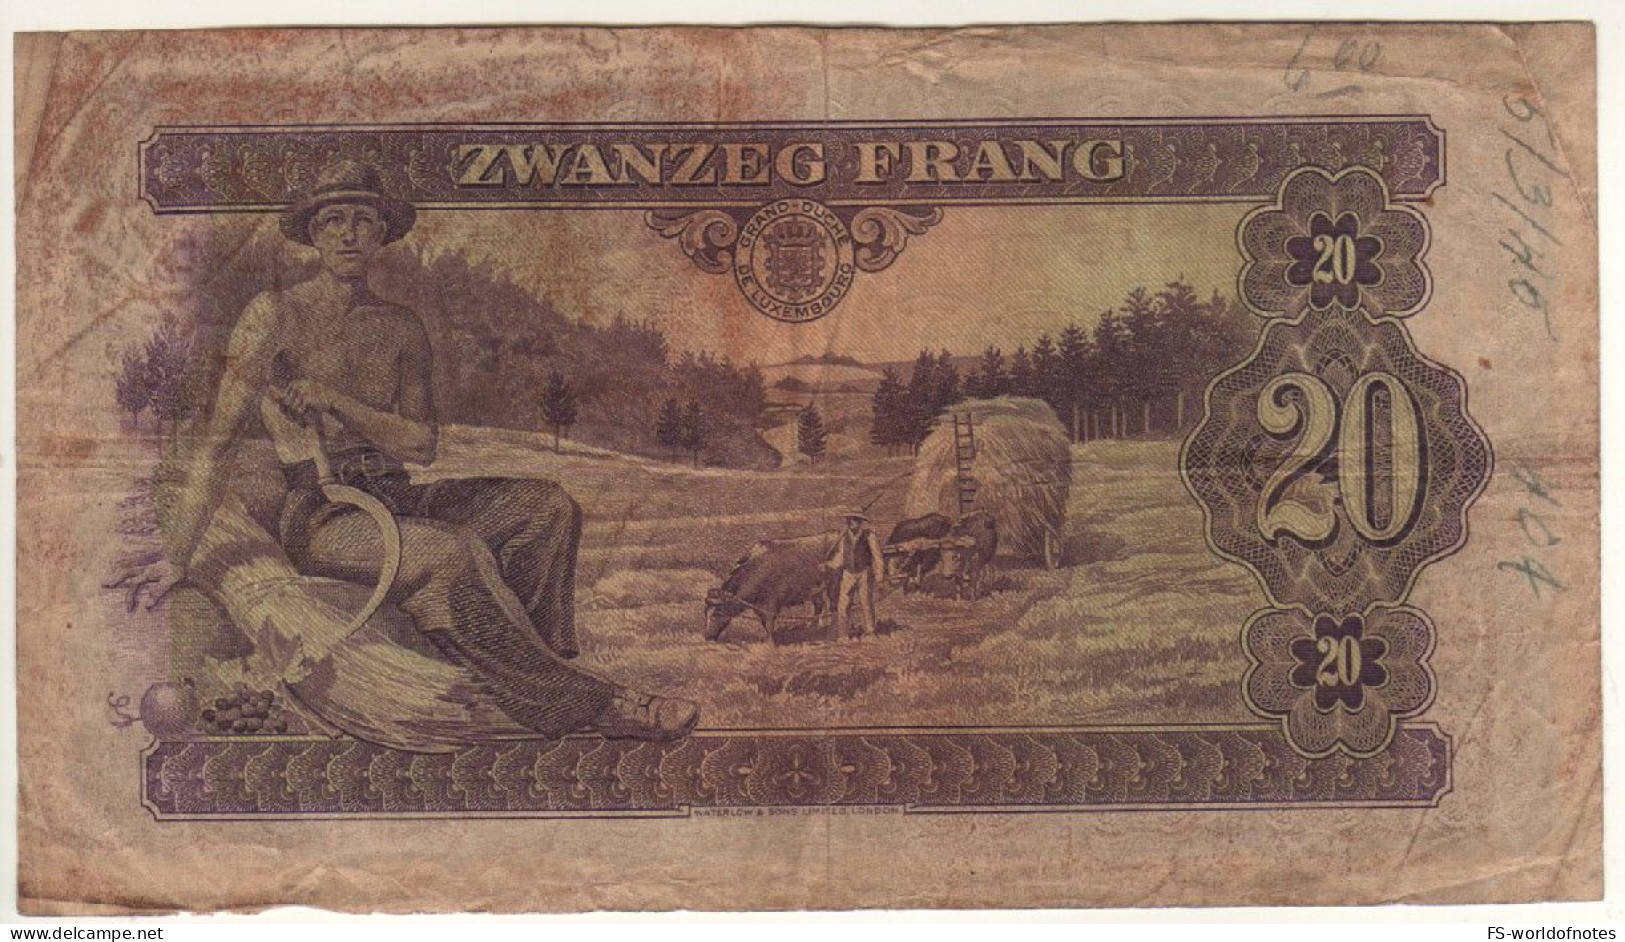 LUXEMBOURG 20 Francs   P42a   (1943    Grand Duchess Charlotte +   Fieldwork On Back ) - Luxembourg